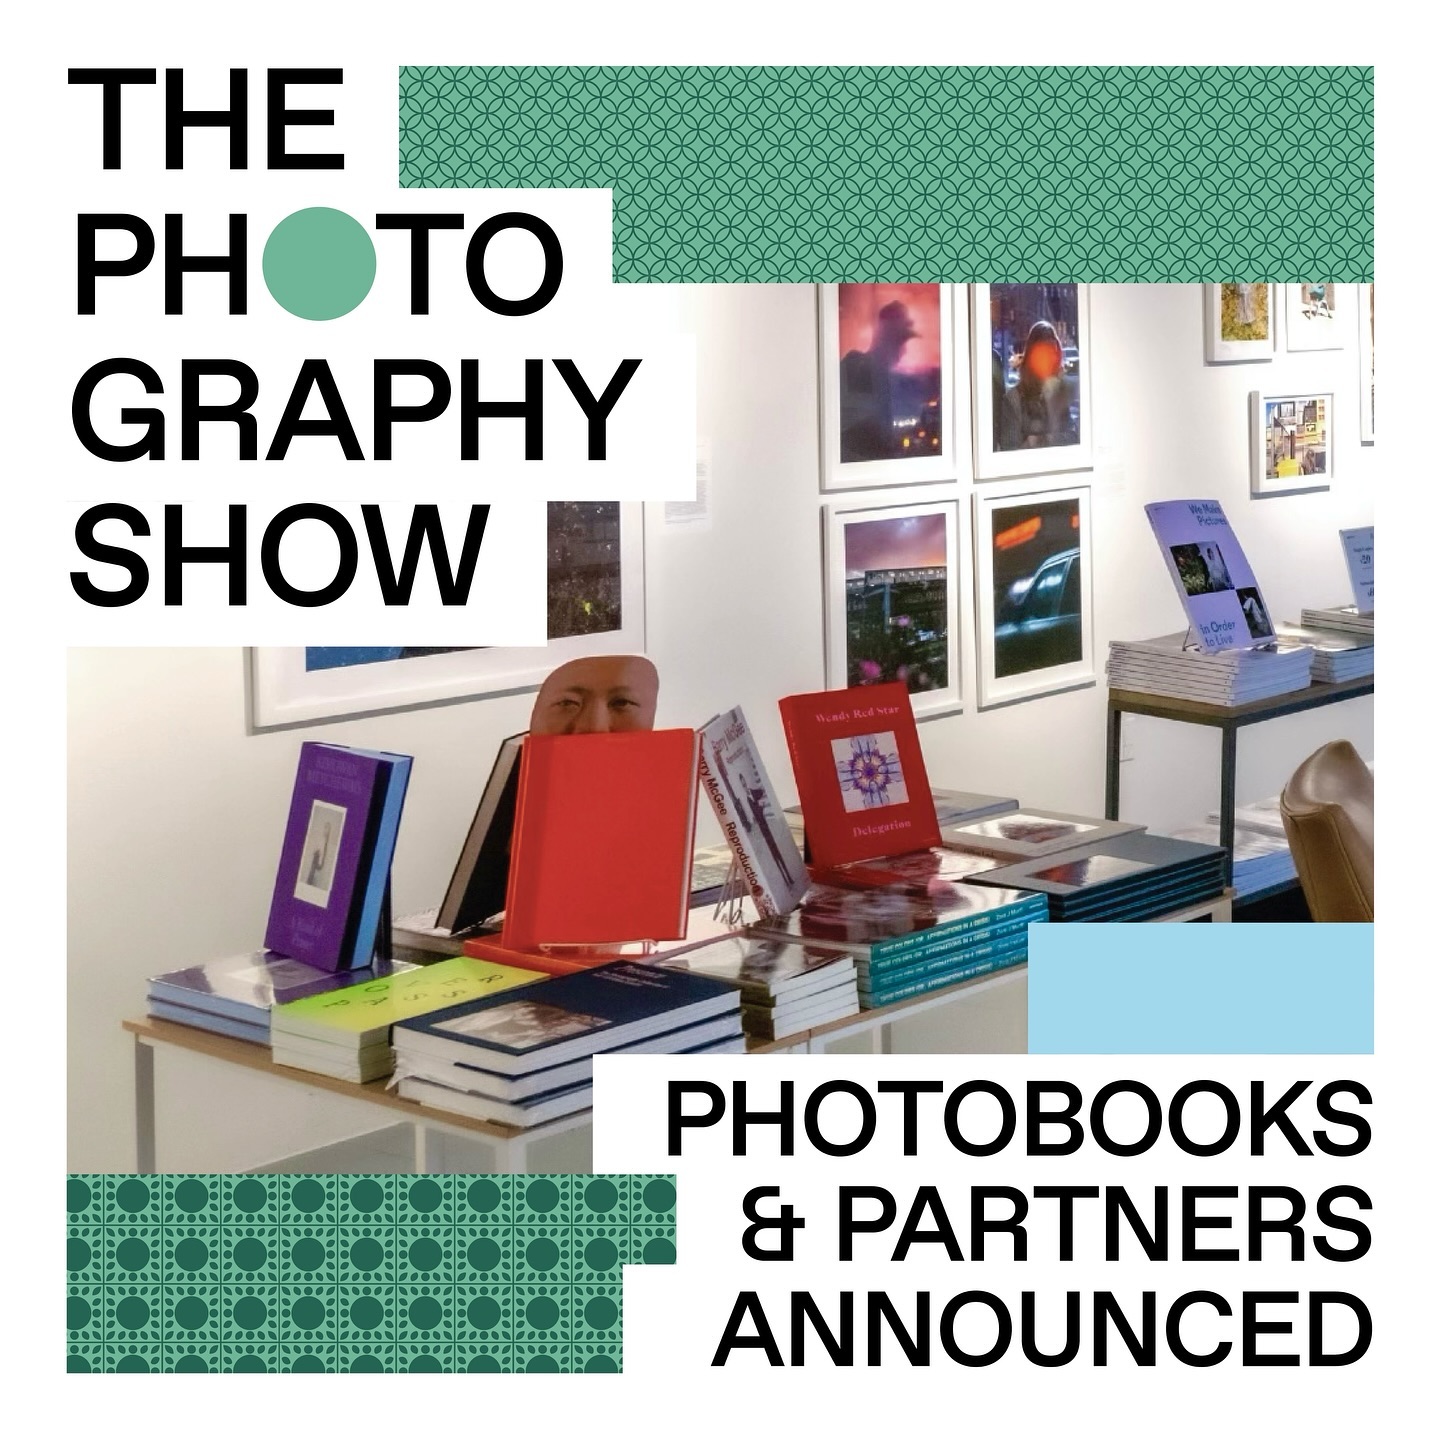 The Photography Show Annouces Photobook Sector Exhibitors